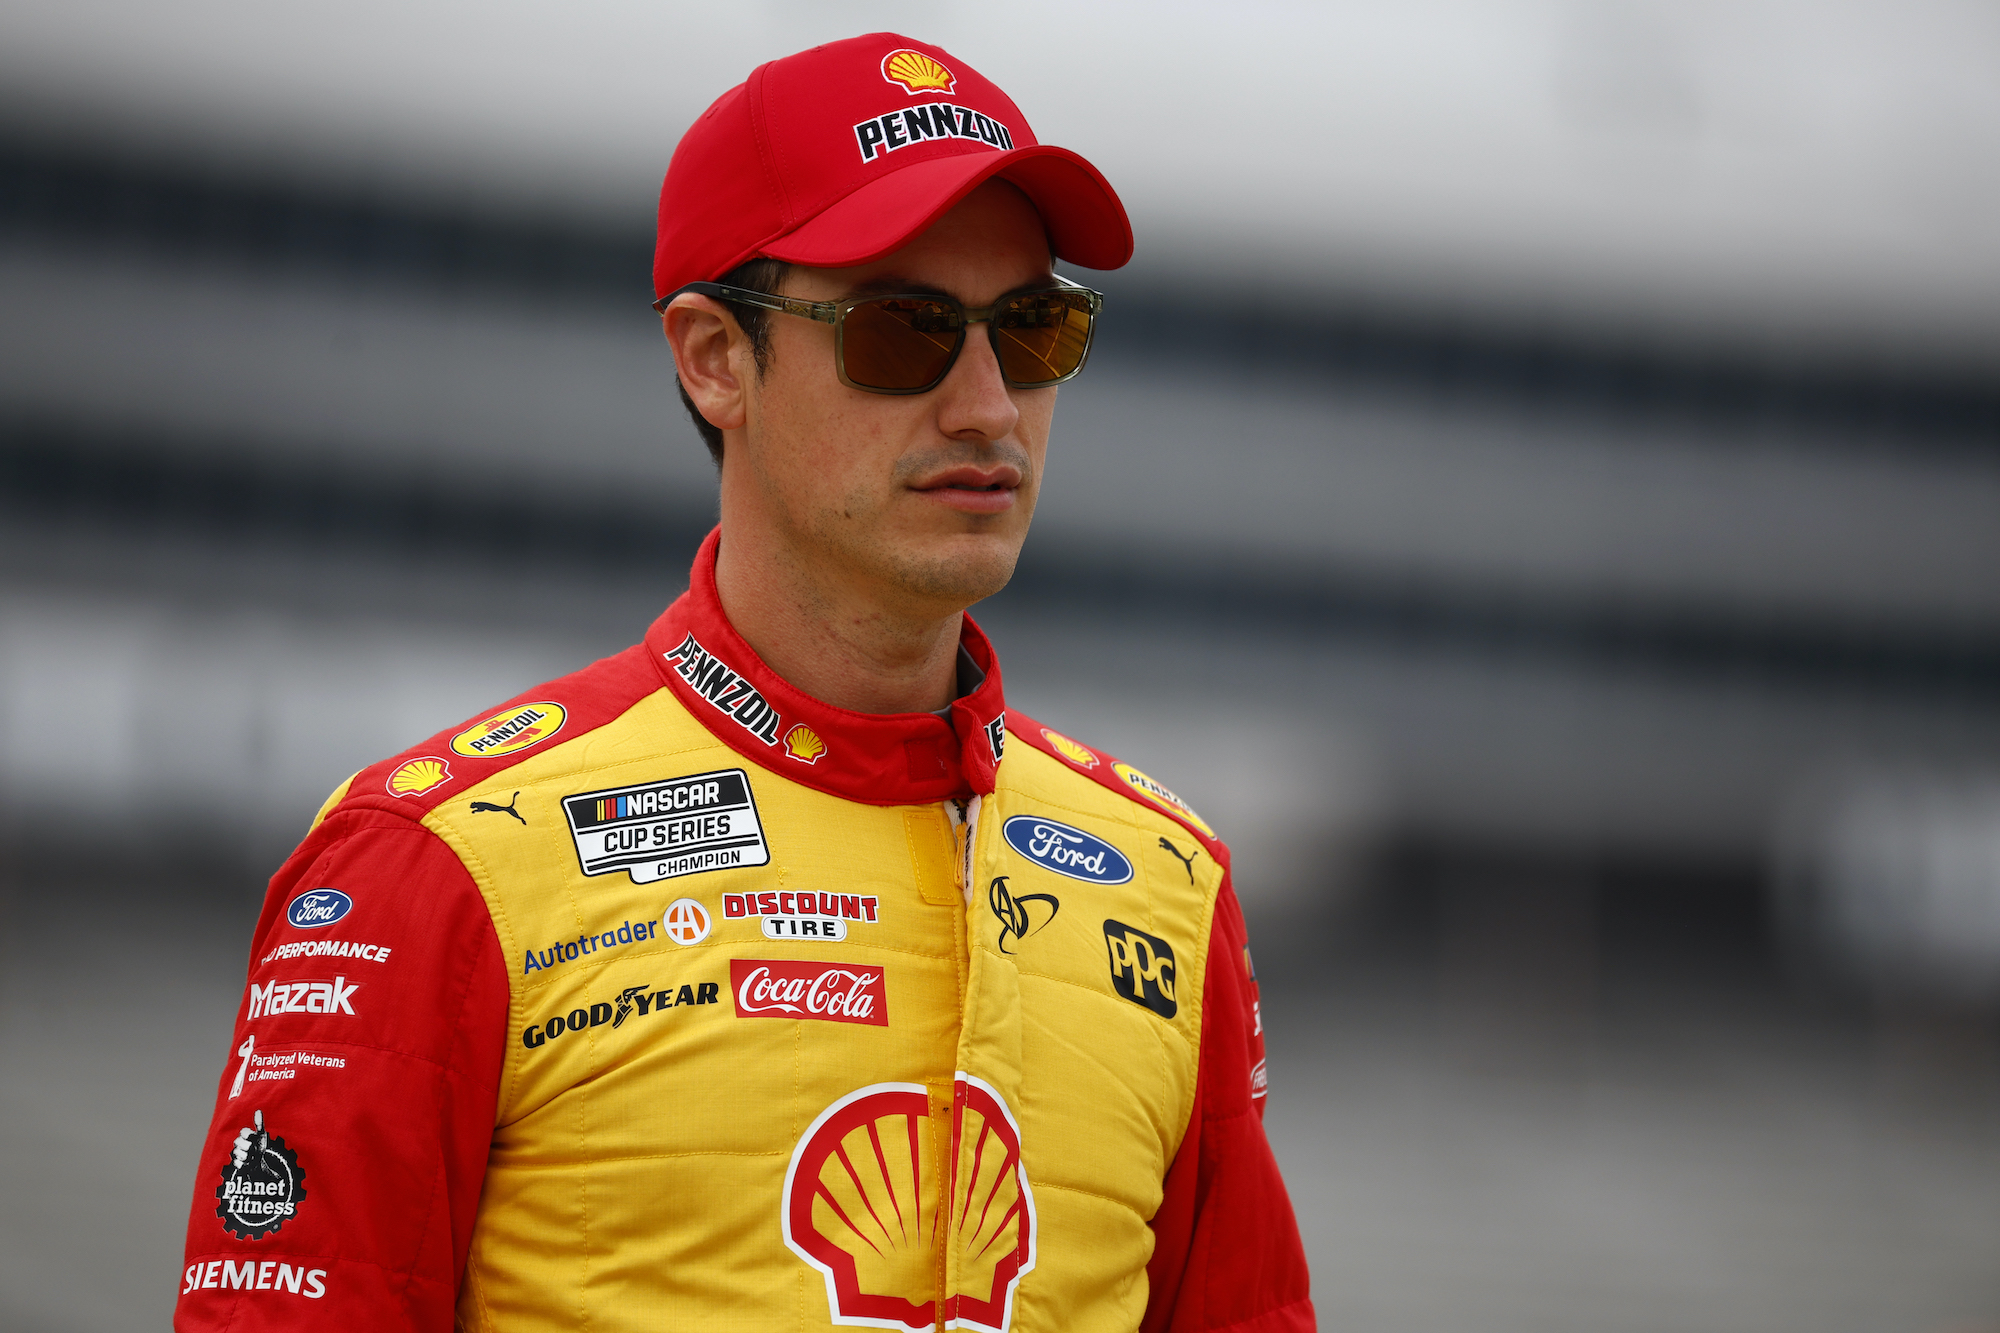 Joey Logano Reveals Disturbing State of Affairs in NASCAR When Discussing Moves Team Penske Is Making to Protect Its Drivers